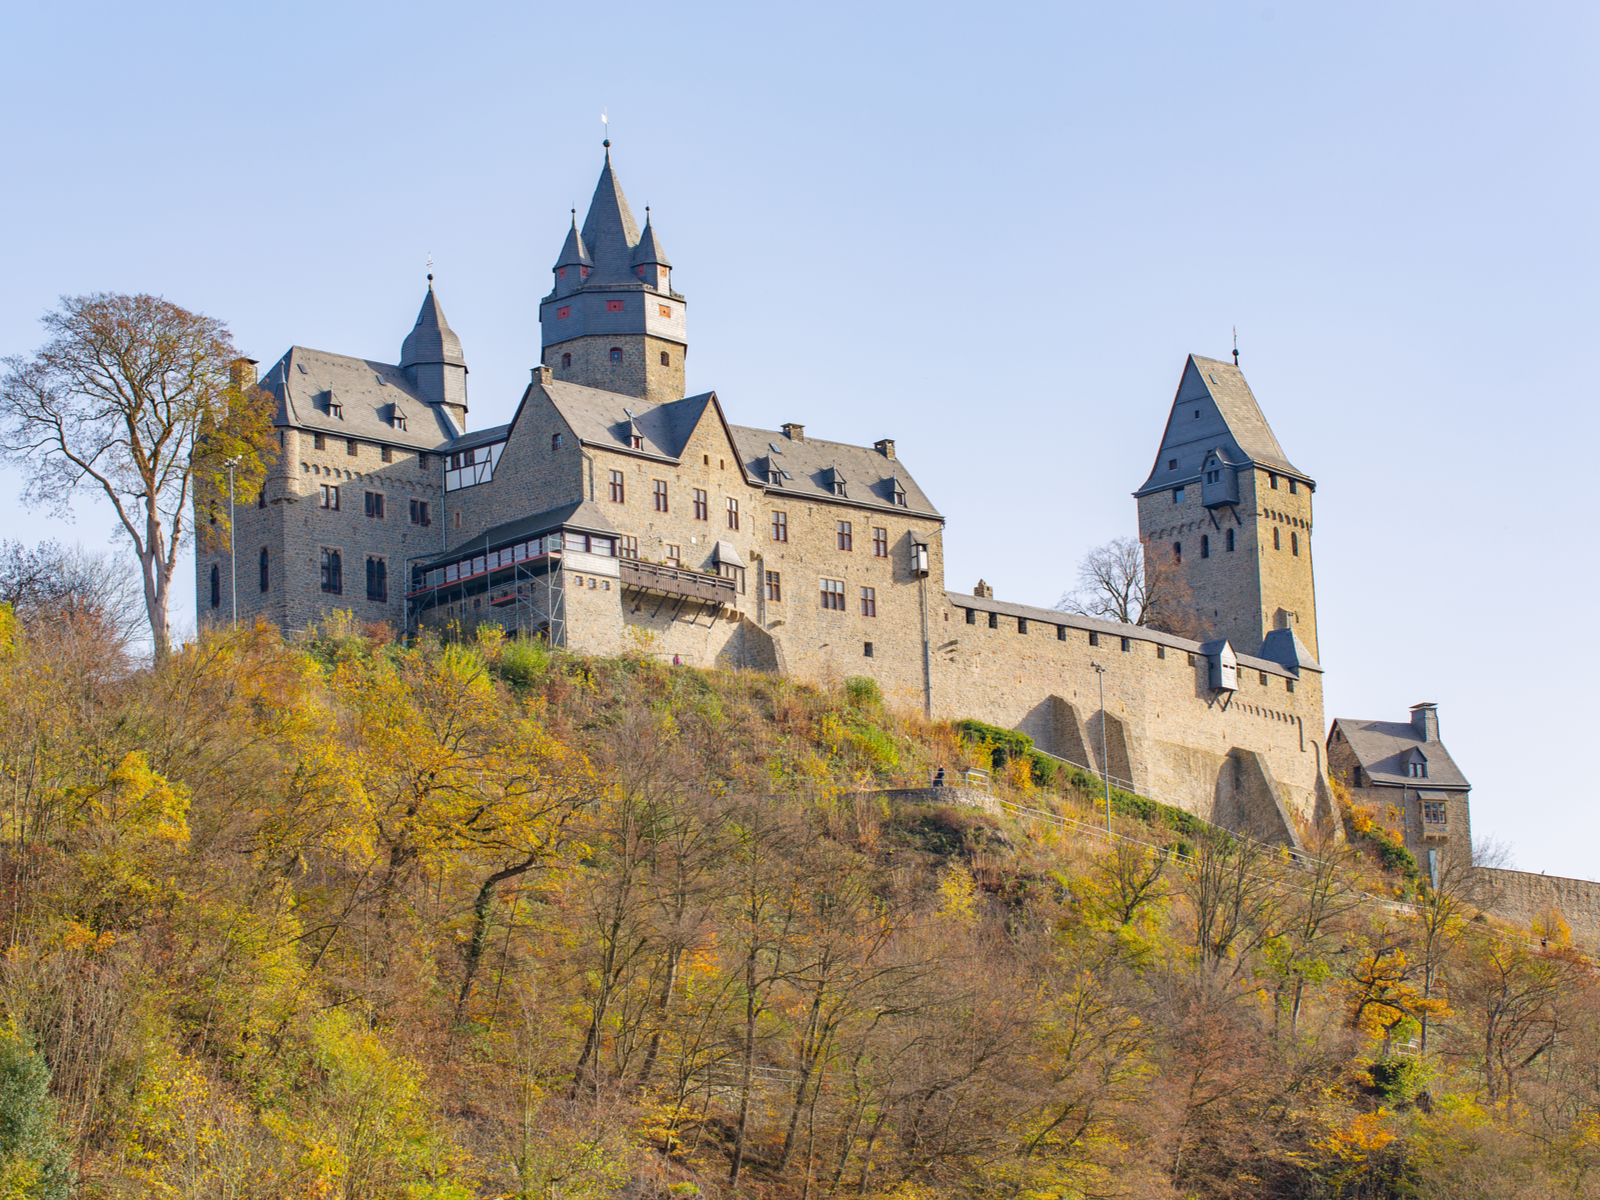 The Historic Burg Altena Castle in Sauerland, one of the best castles in Germany, sitting on a mountain peak 